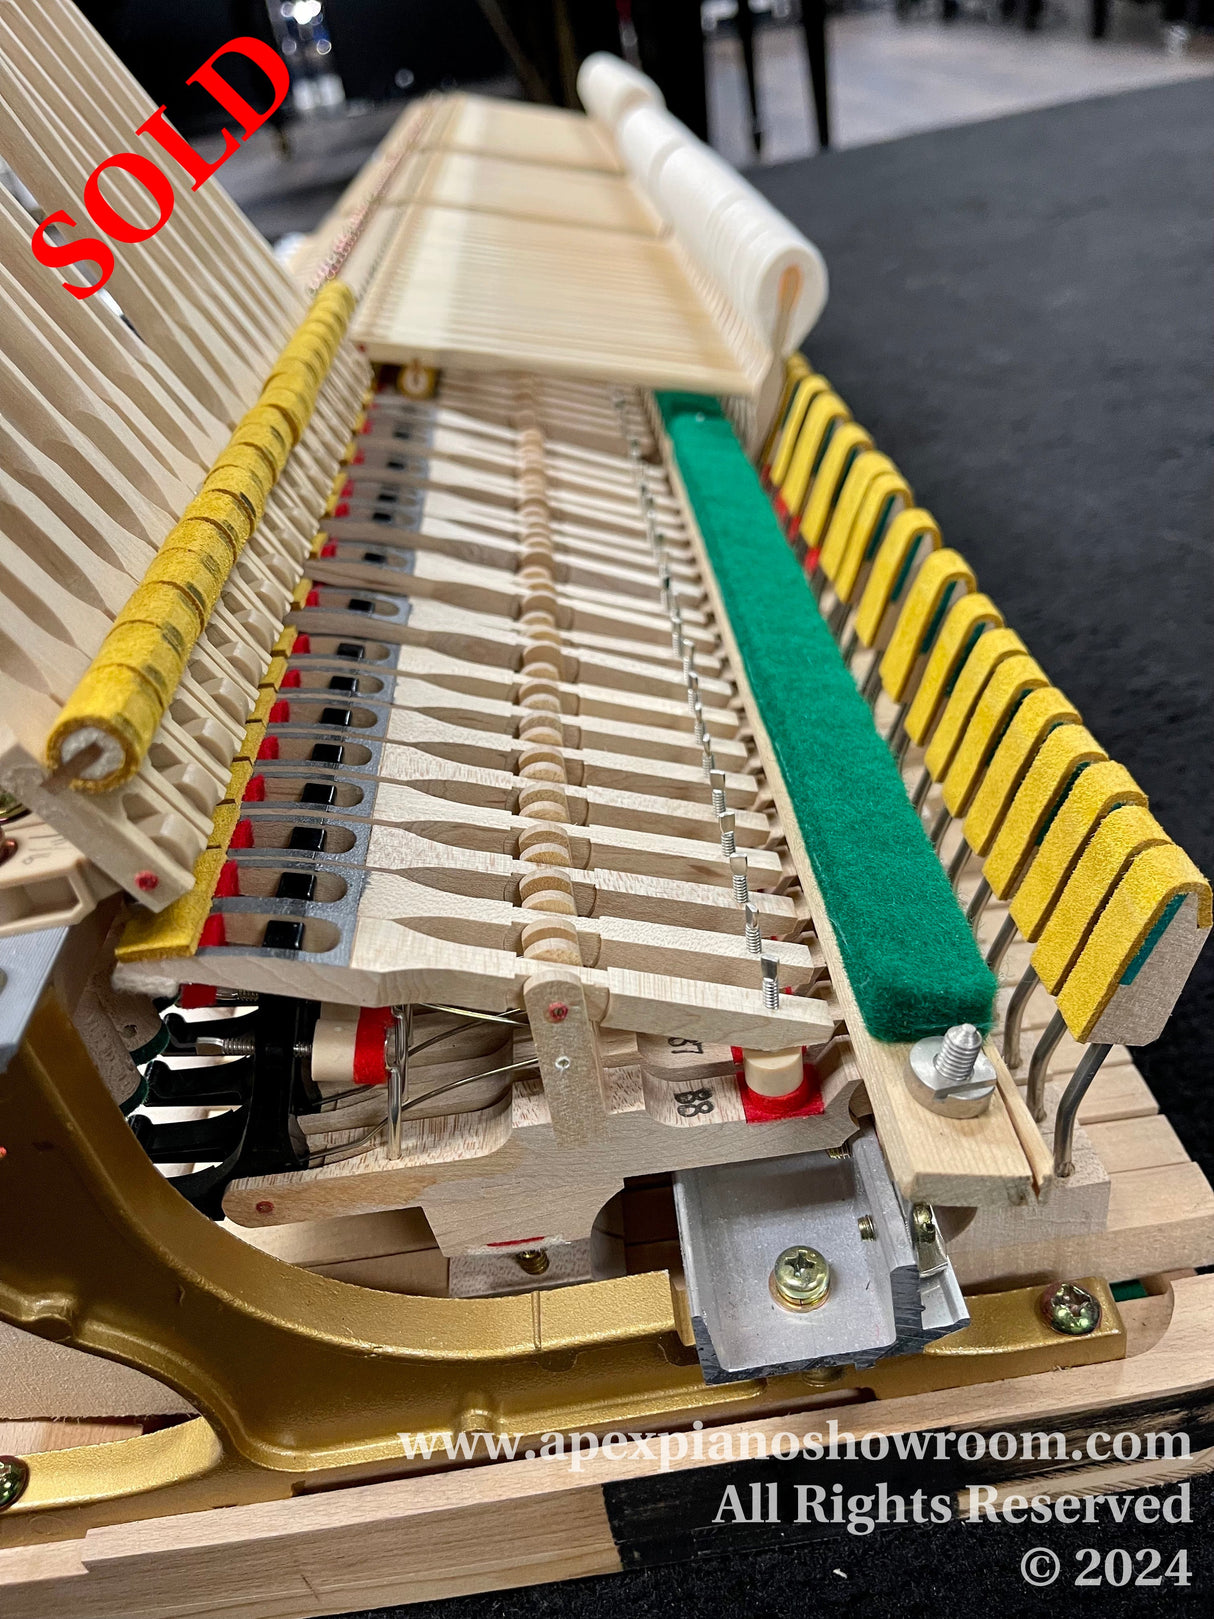 Close-up view of the interior mechanism of a grand piano, showcasing the hammers, dampers, and strings with a clear focus on the intricate craftsmanship and wooden components.